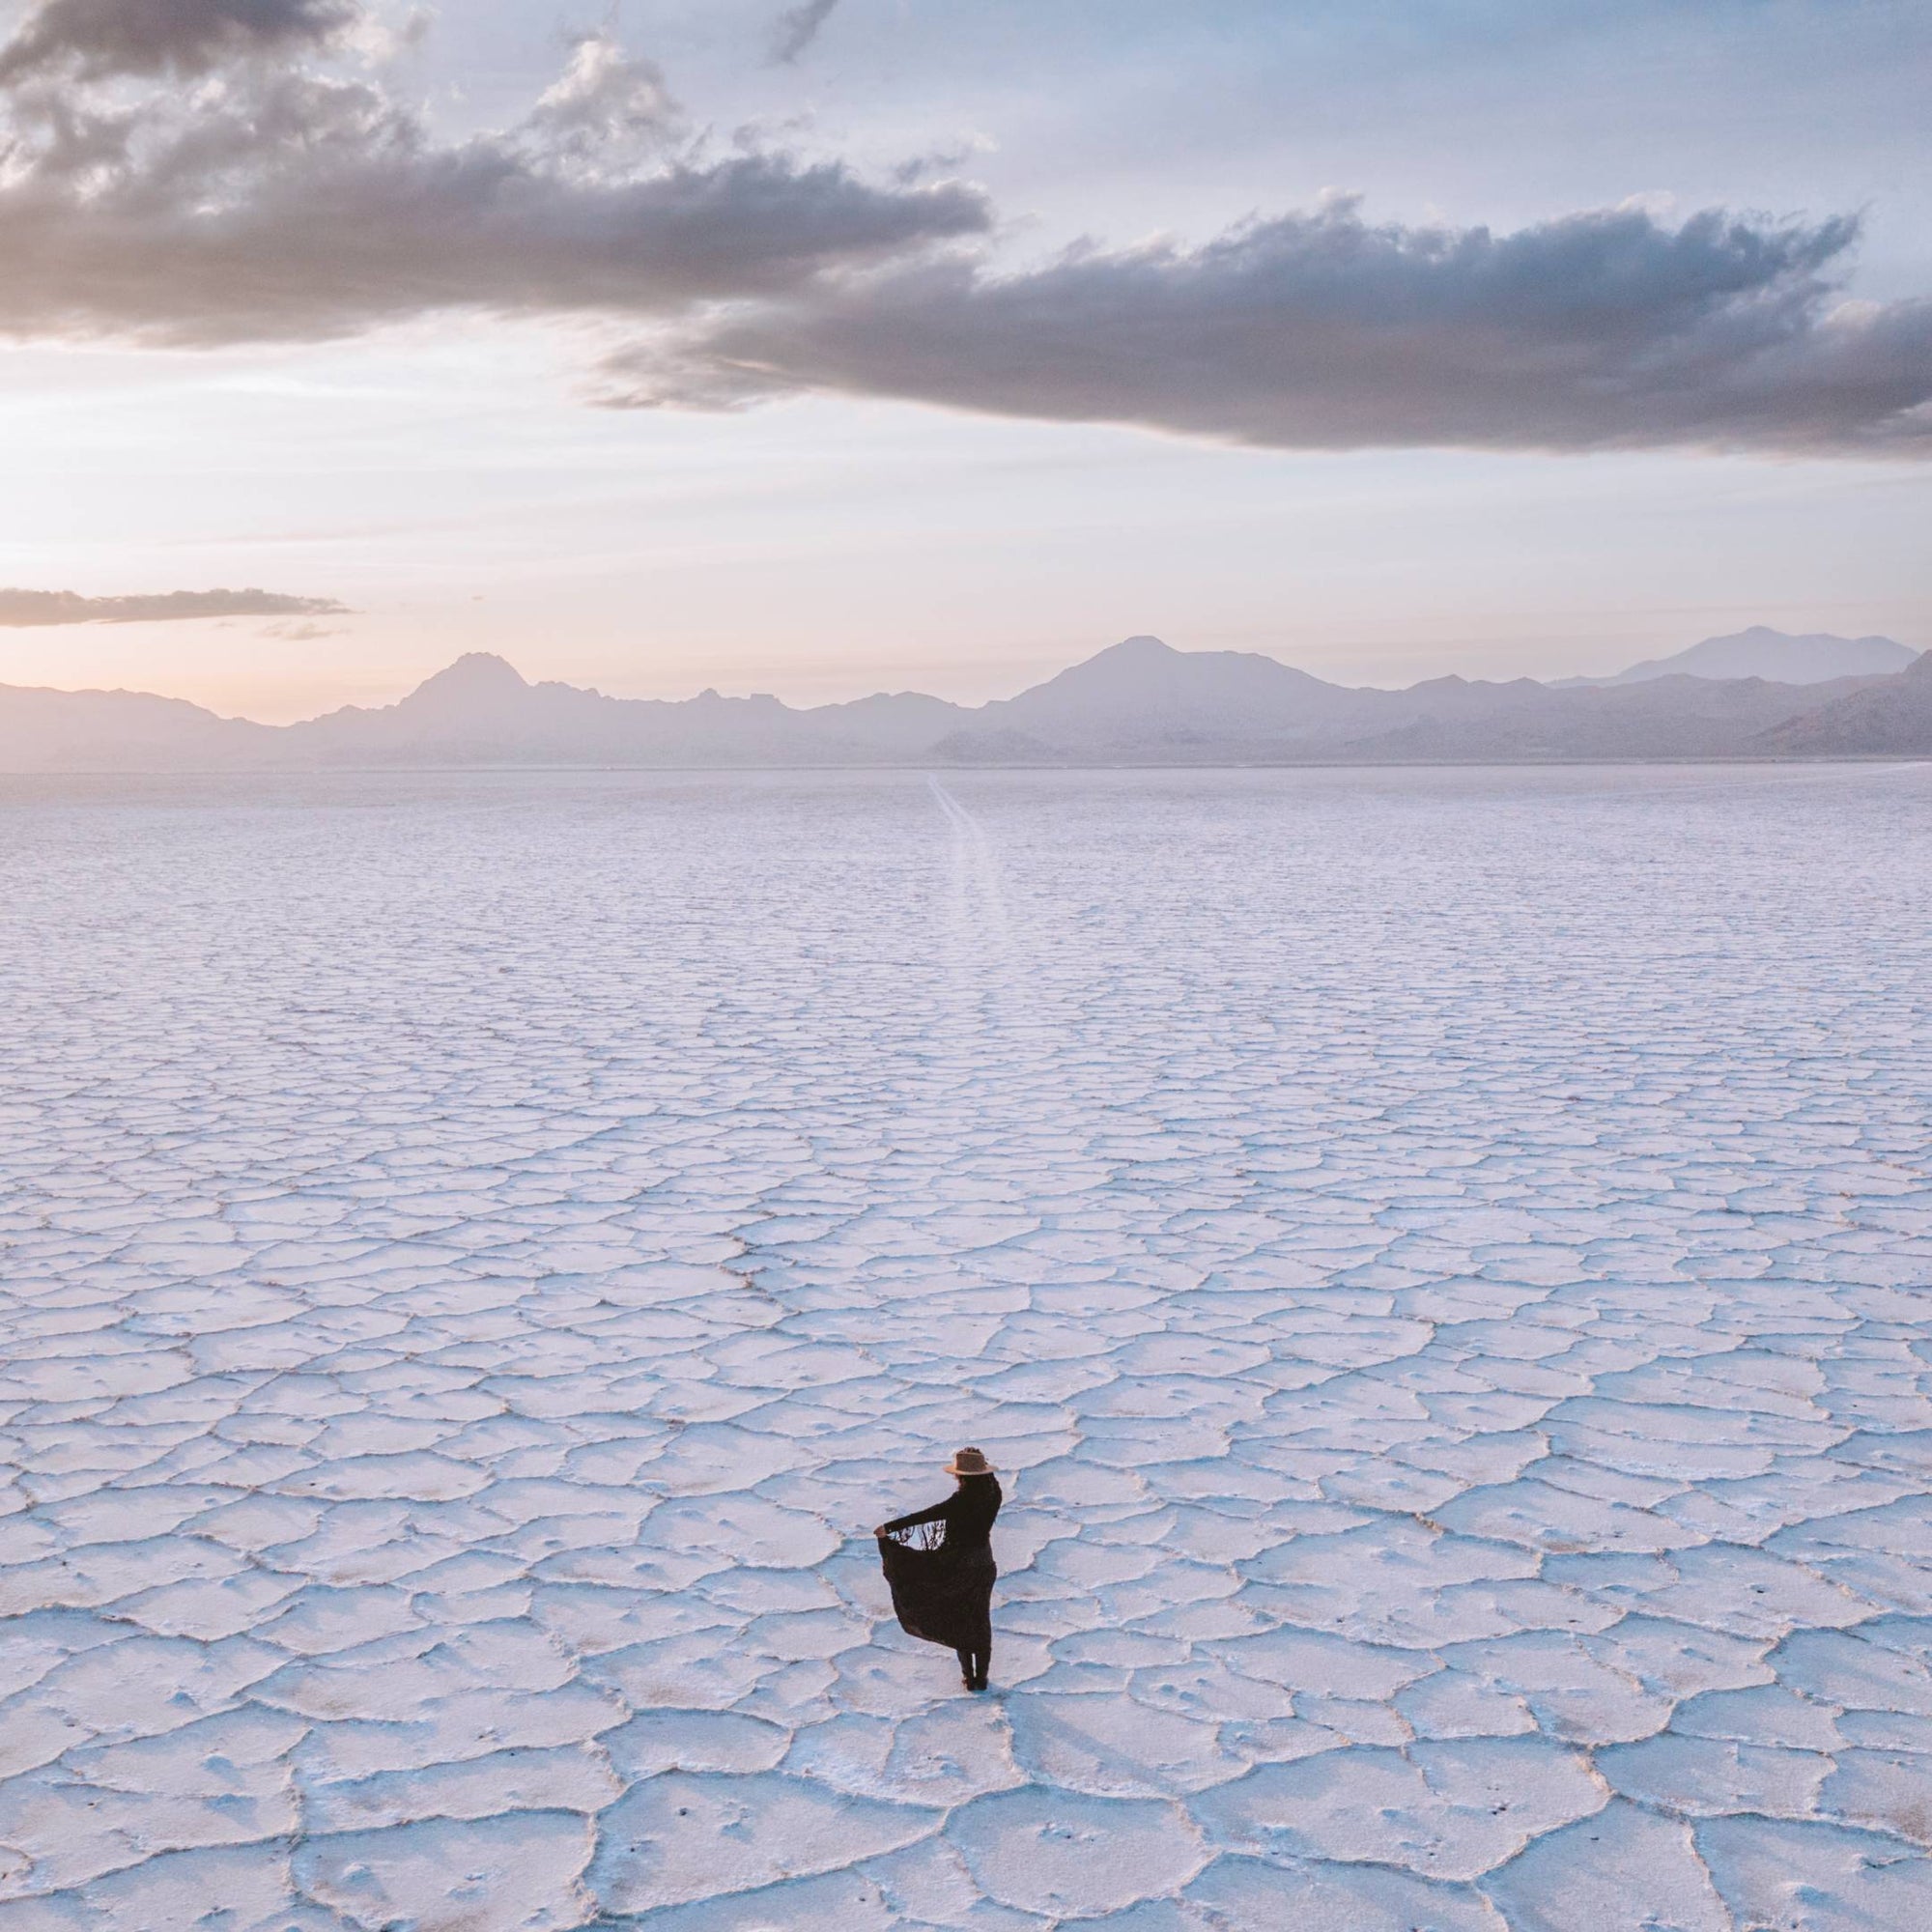 Blanca standing in the middle of a large salt field